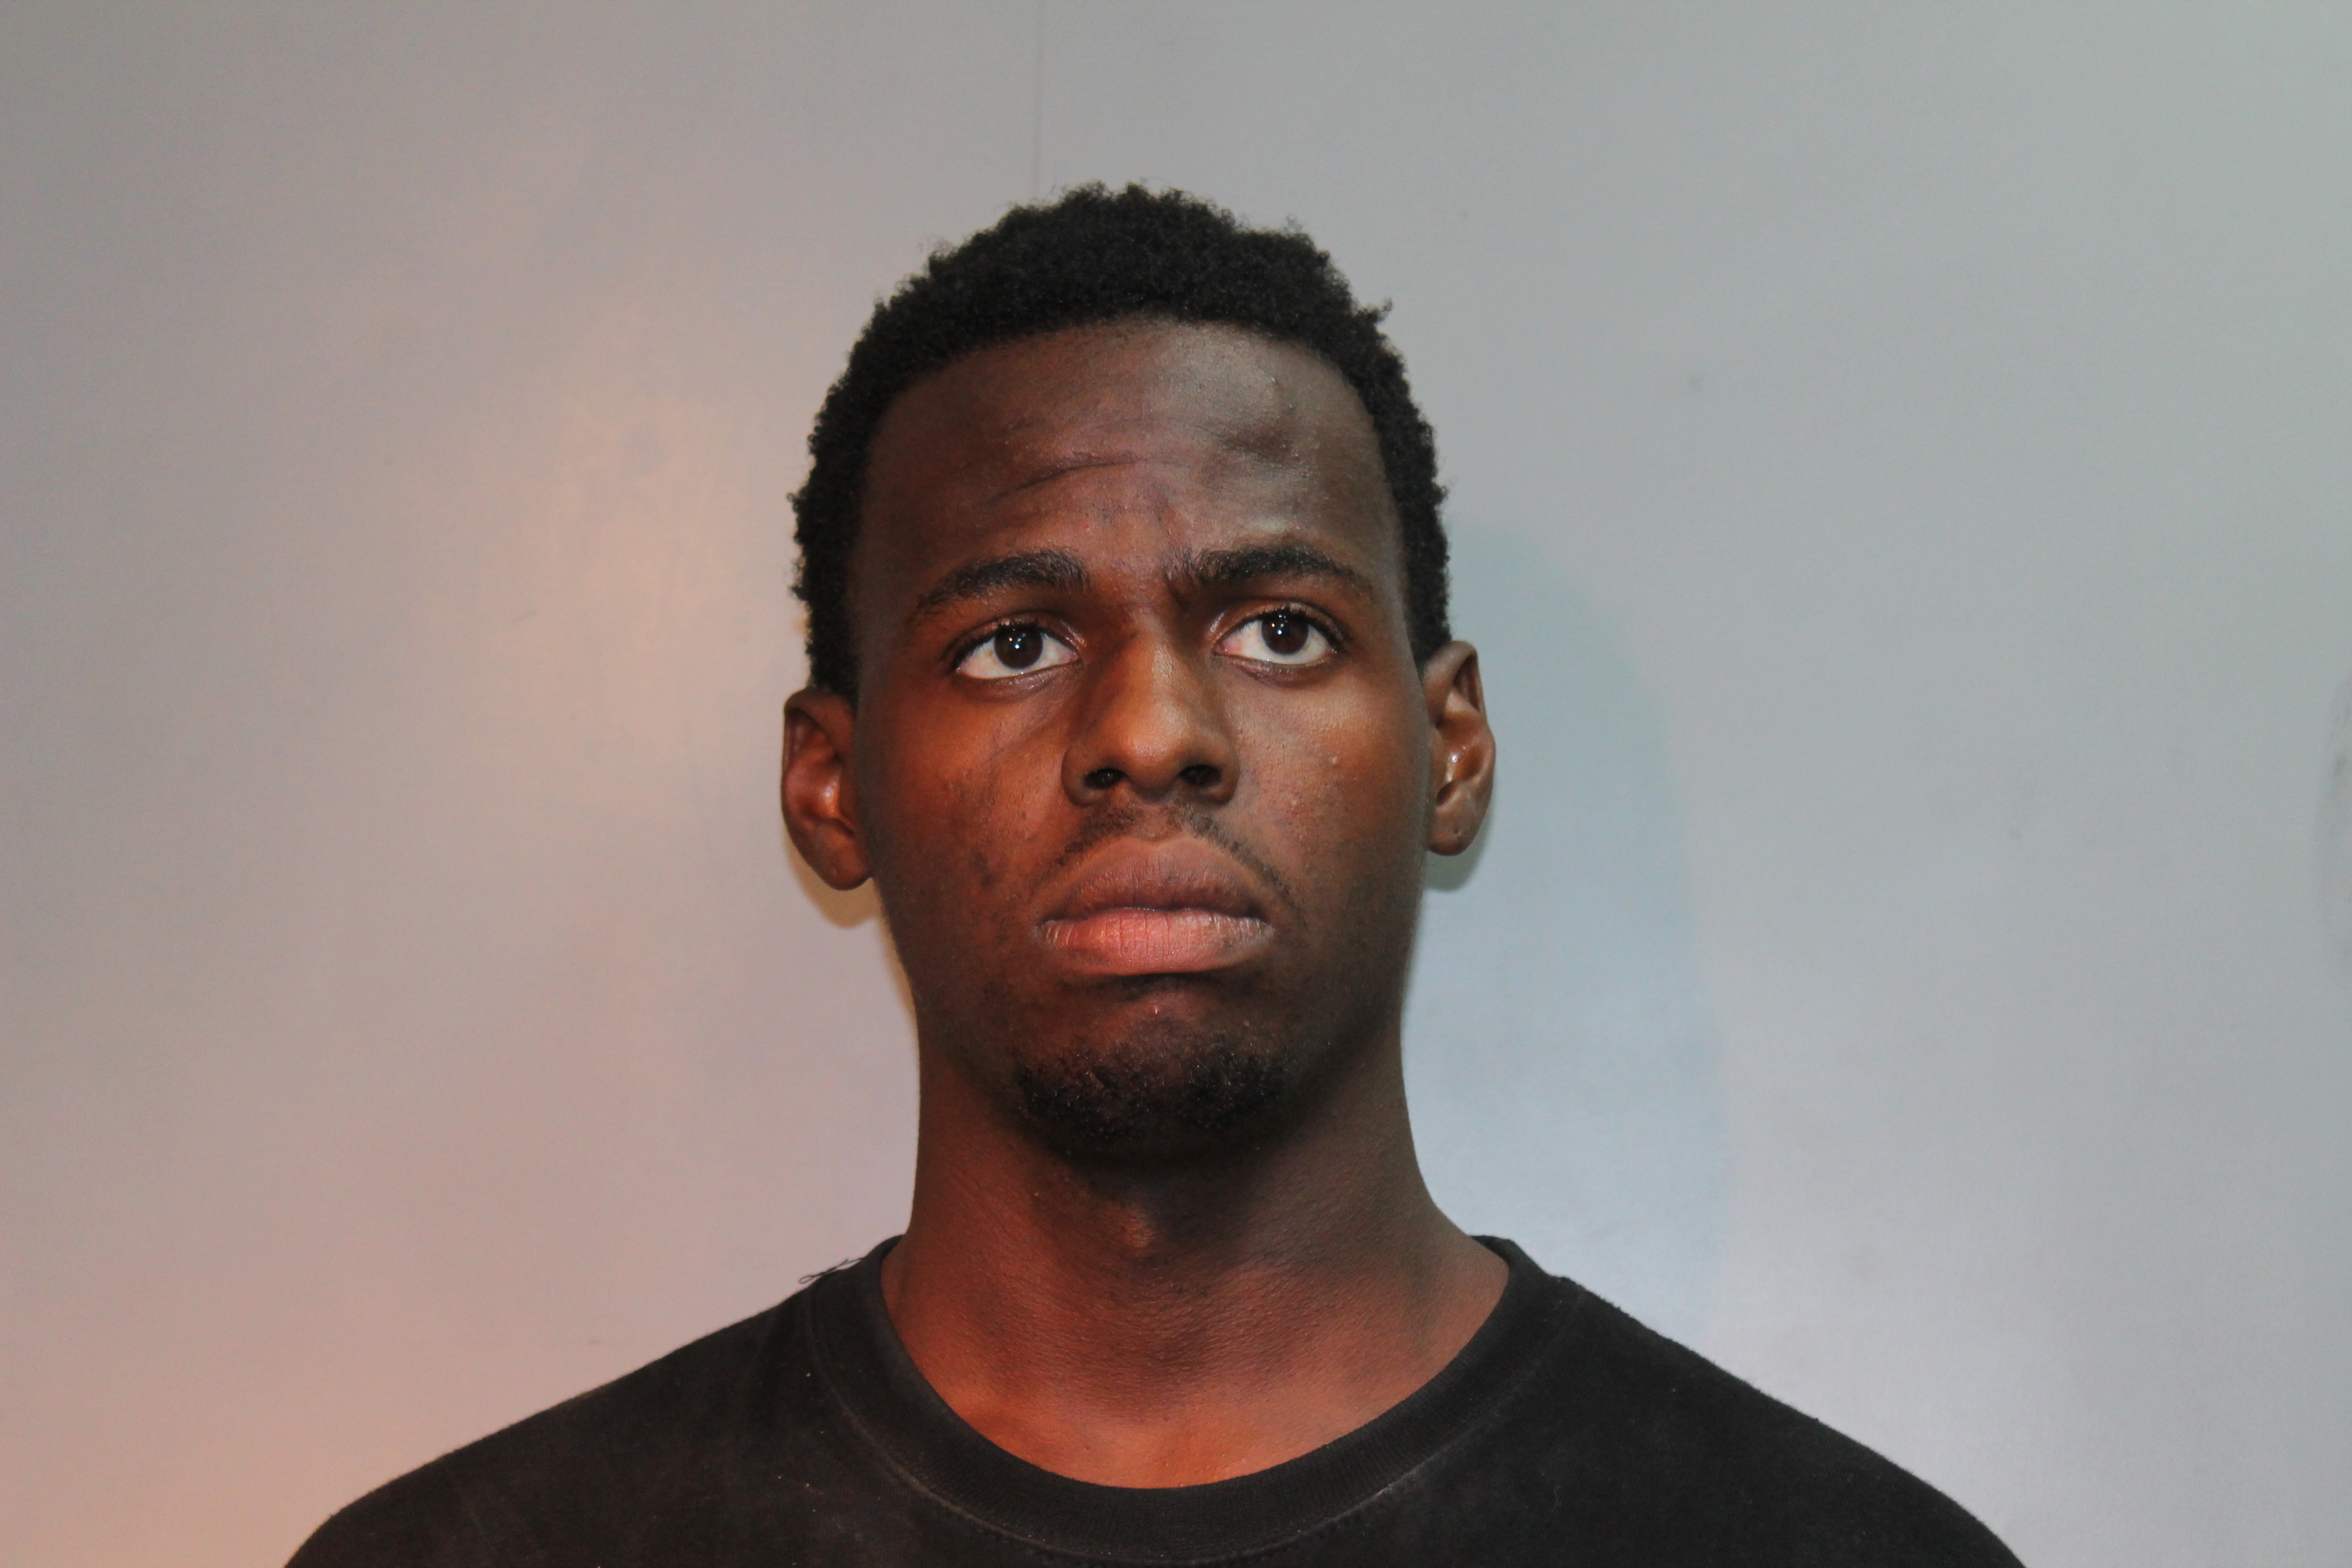 VIPD: Two St. Croix Men Allegedly Threaten 13-Year-Old Girl And Her Family For Jewelry